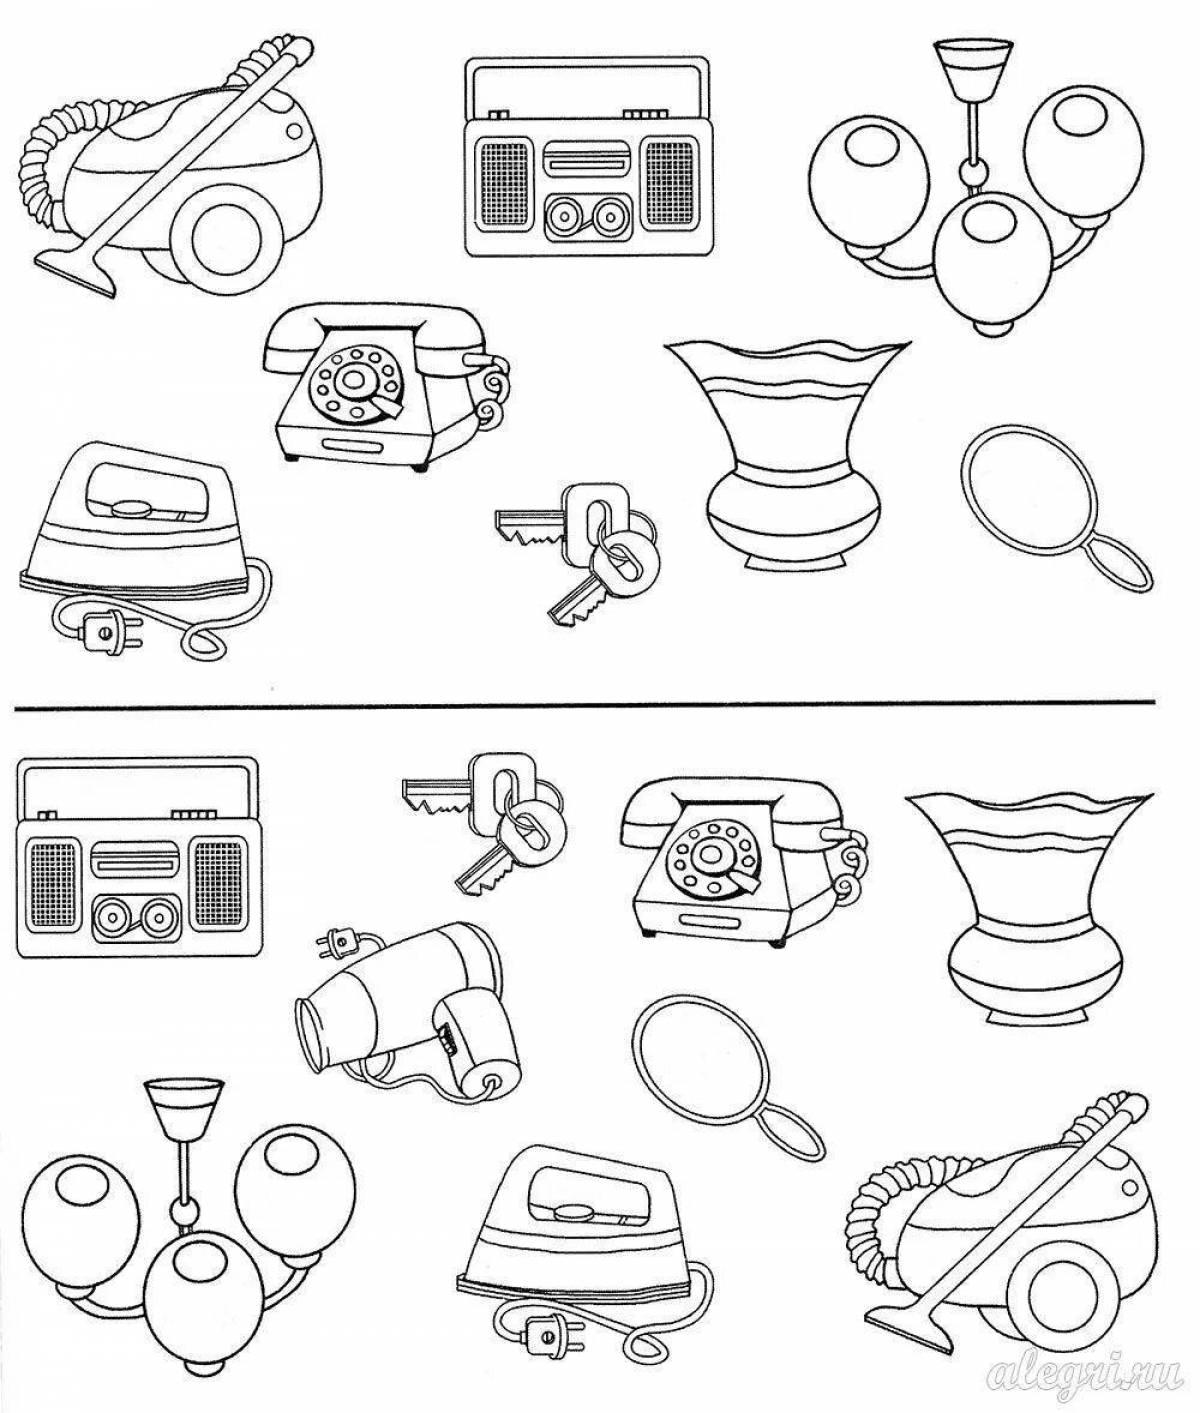 Fun coloring of household appliances for children 4-5 years old